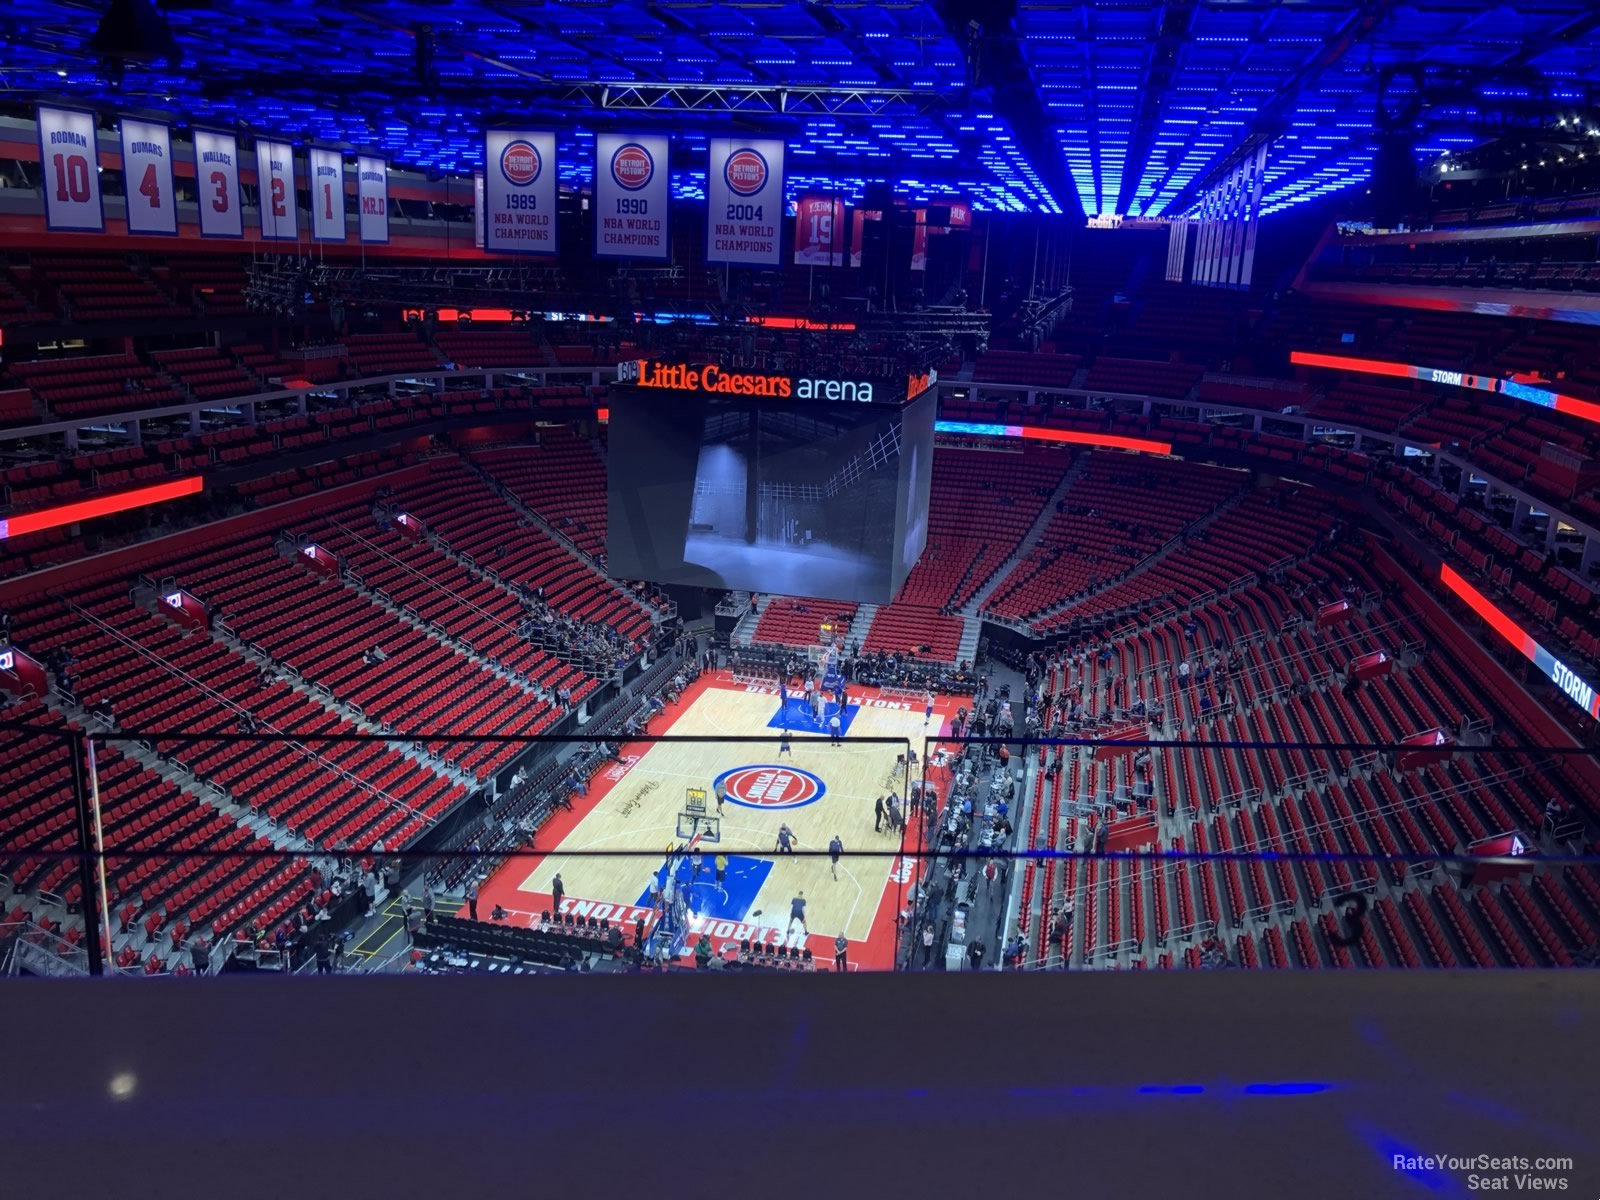 section 201, row 8 seat view  for basketball - little caesars arena